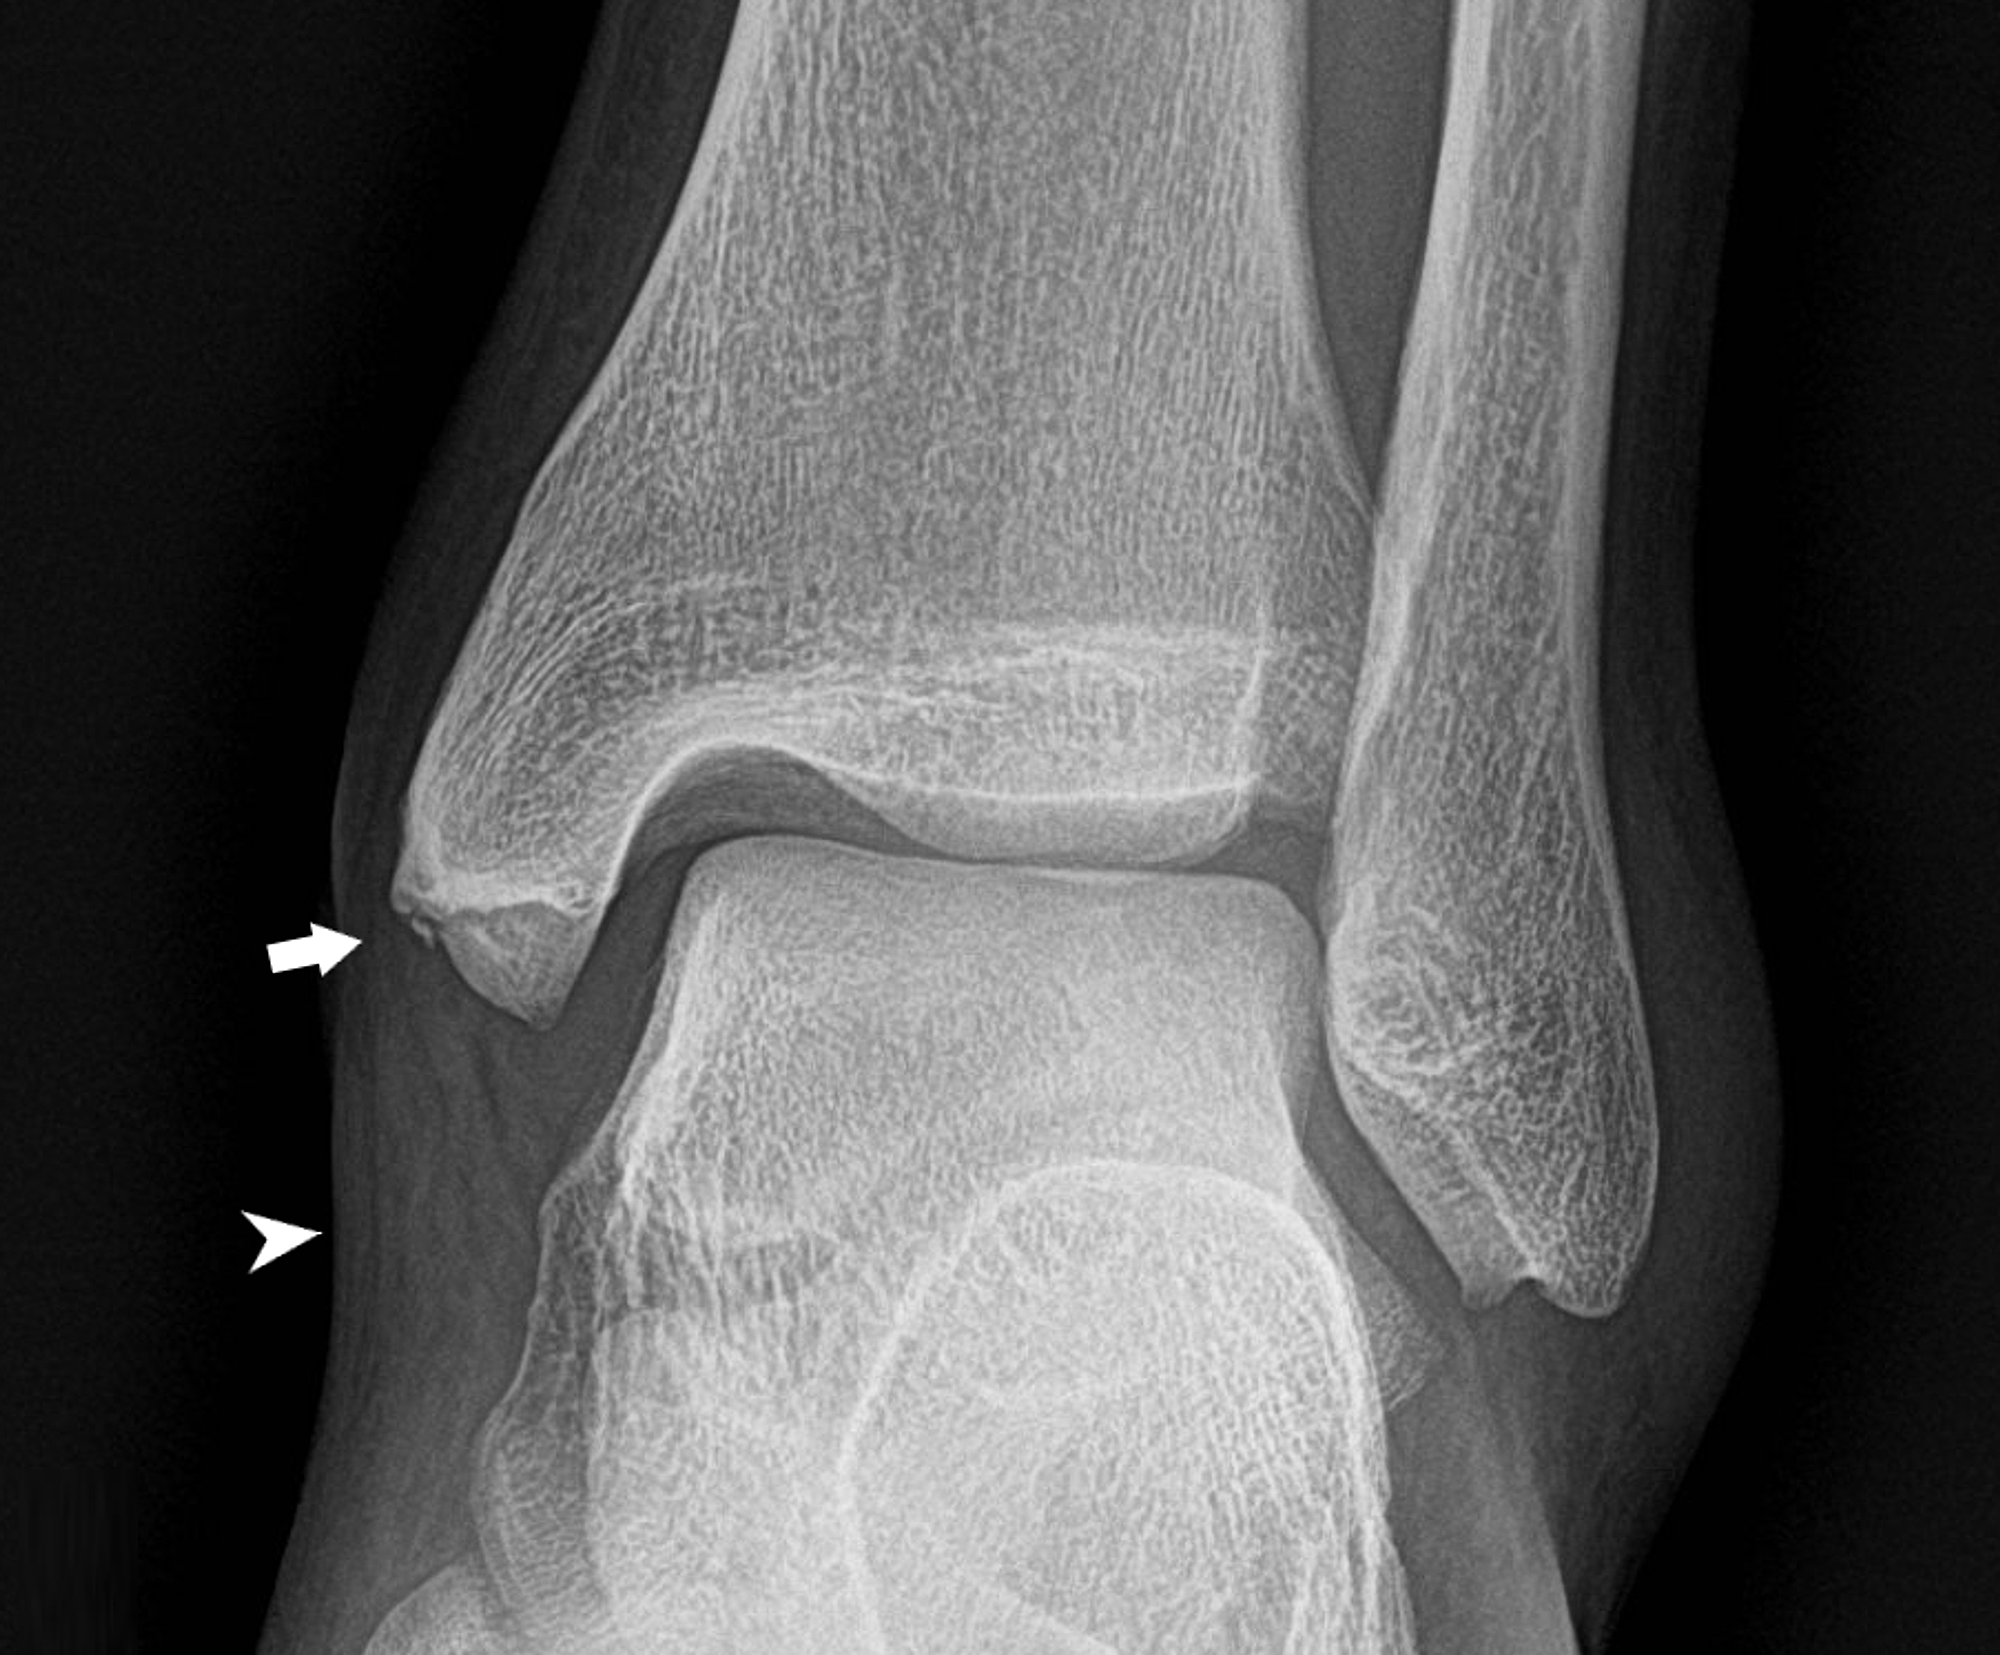 lateral malleolus fracture picture